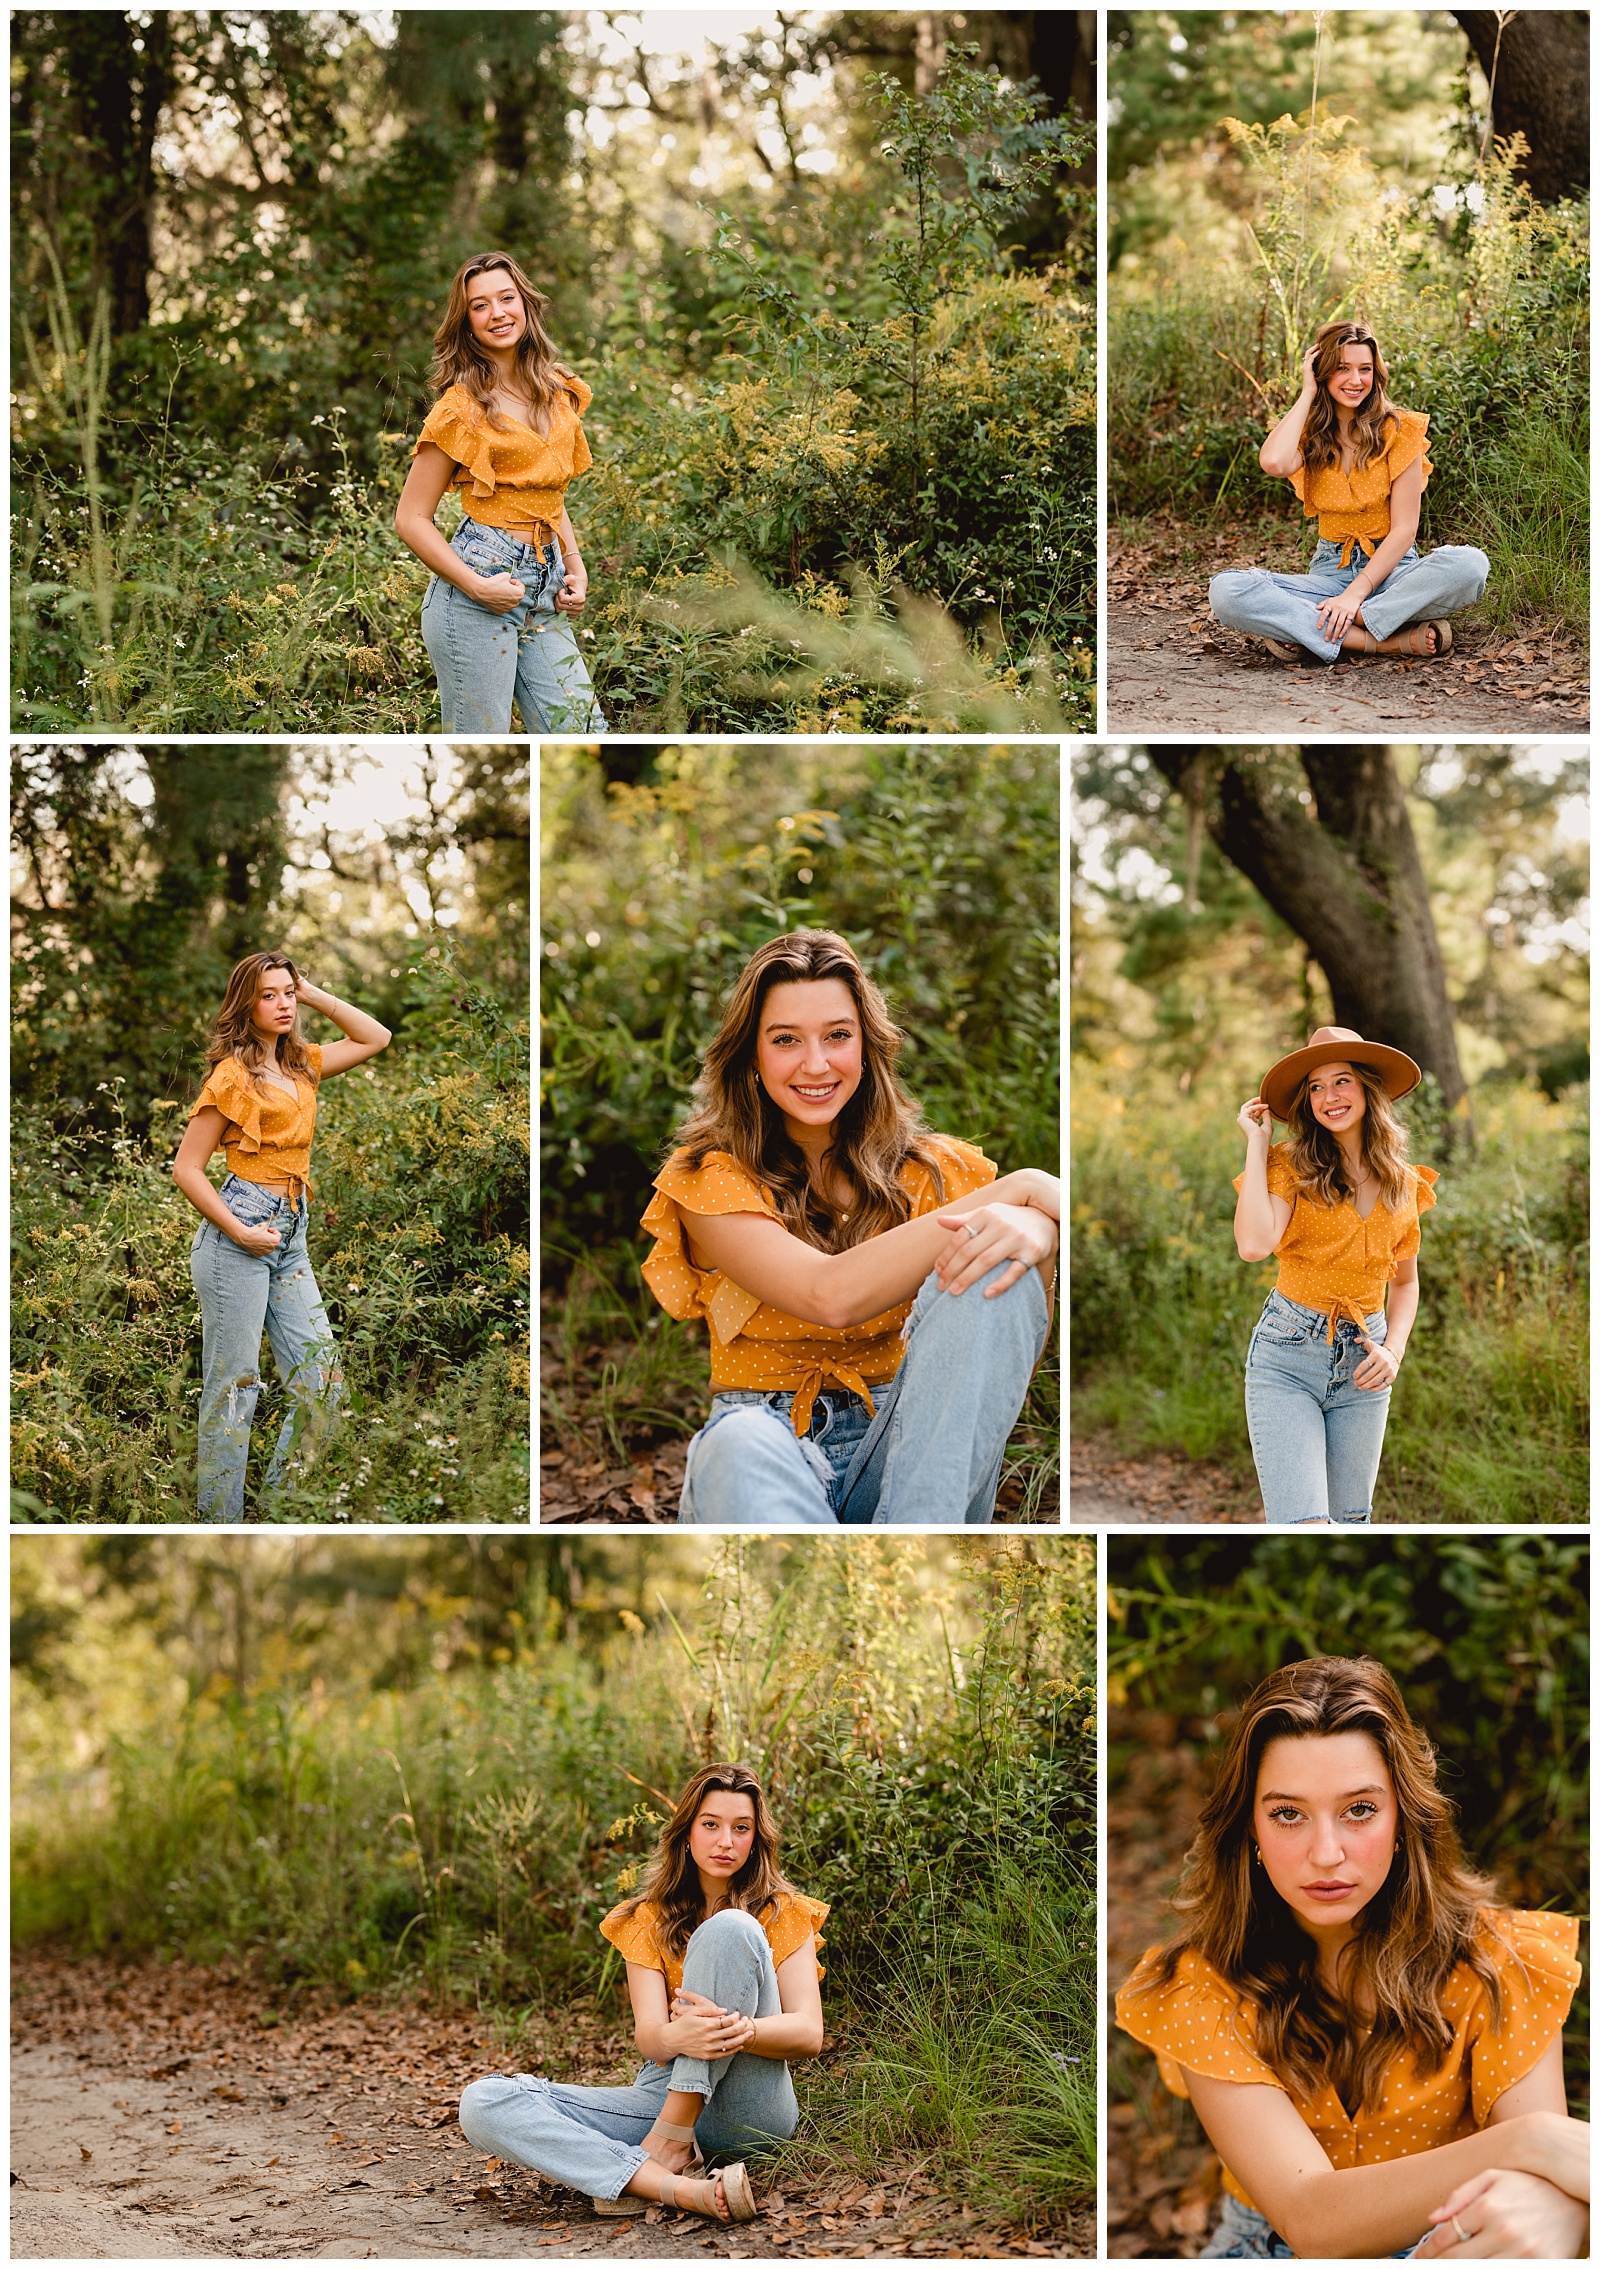 Tallahassee senior photographer takes photos of girl in cute mustard top.